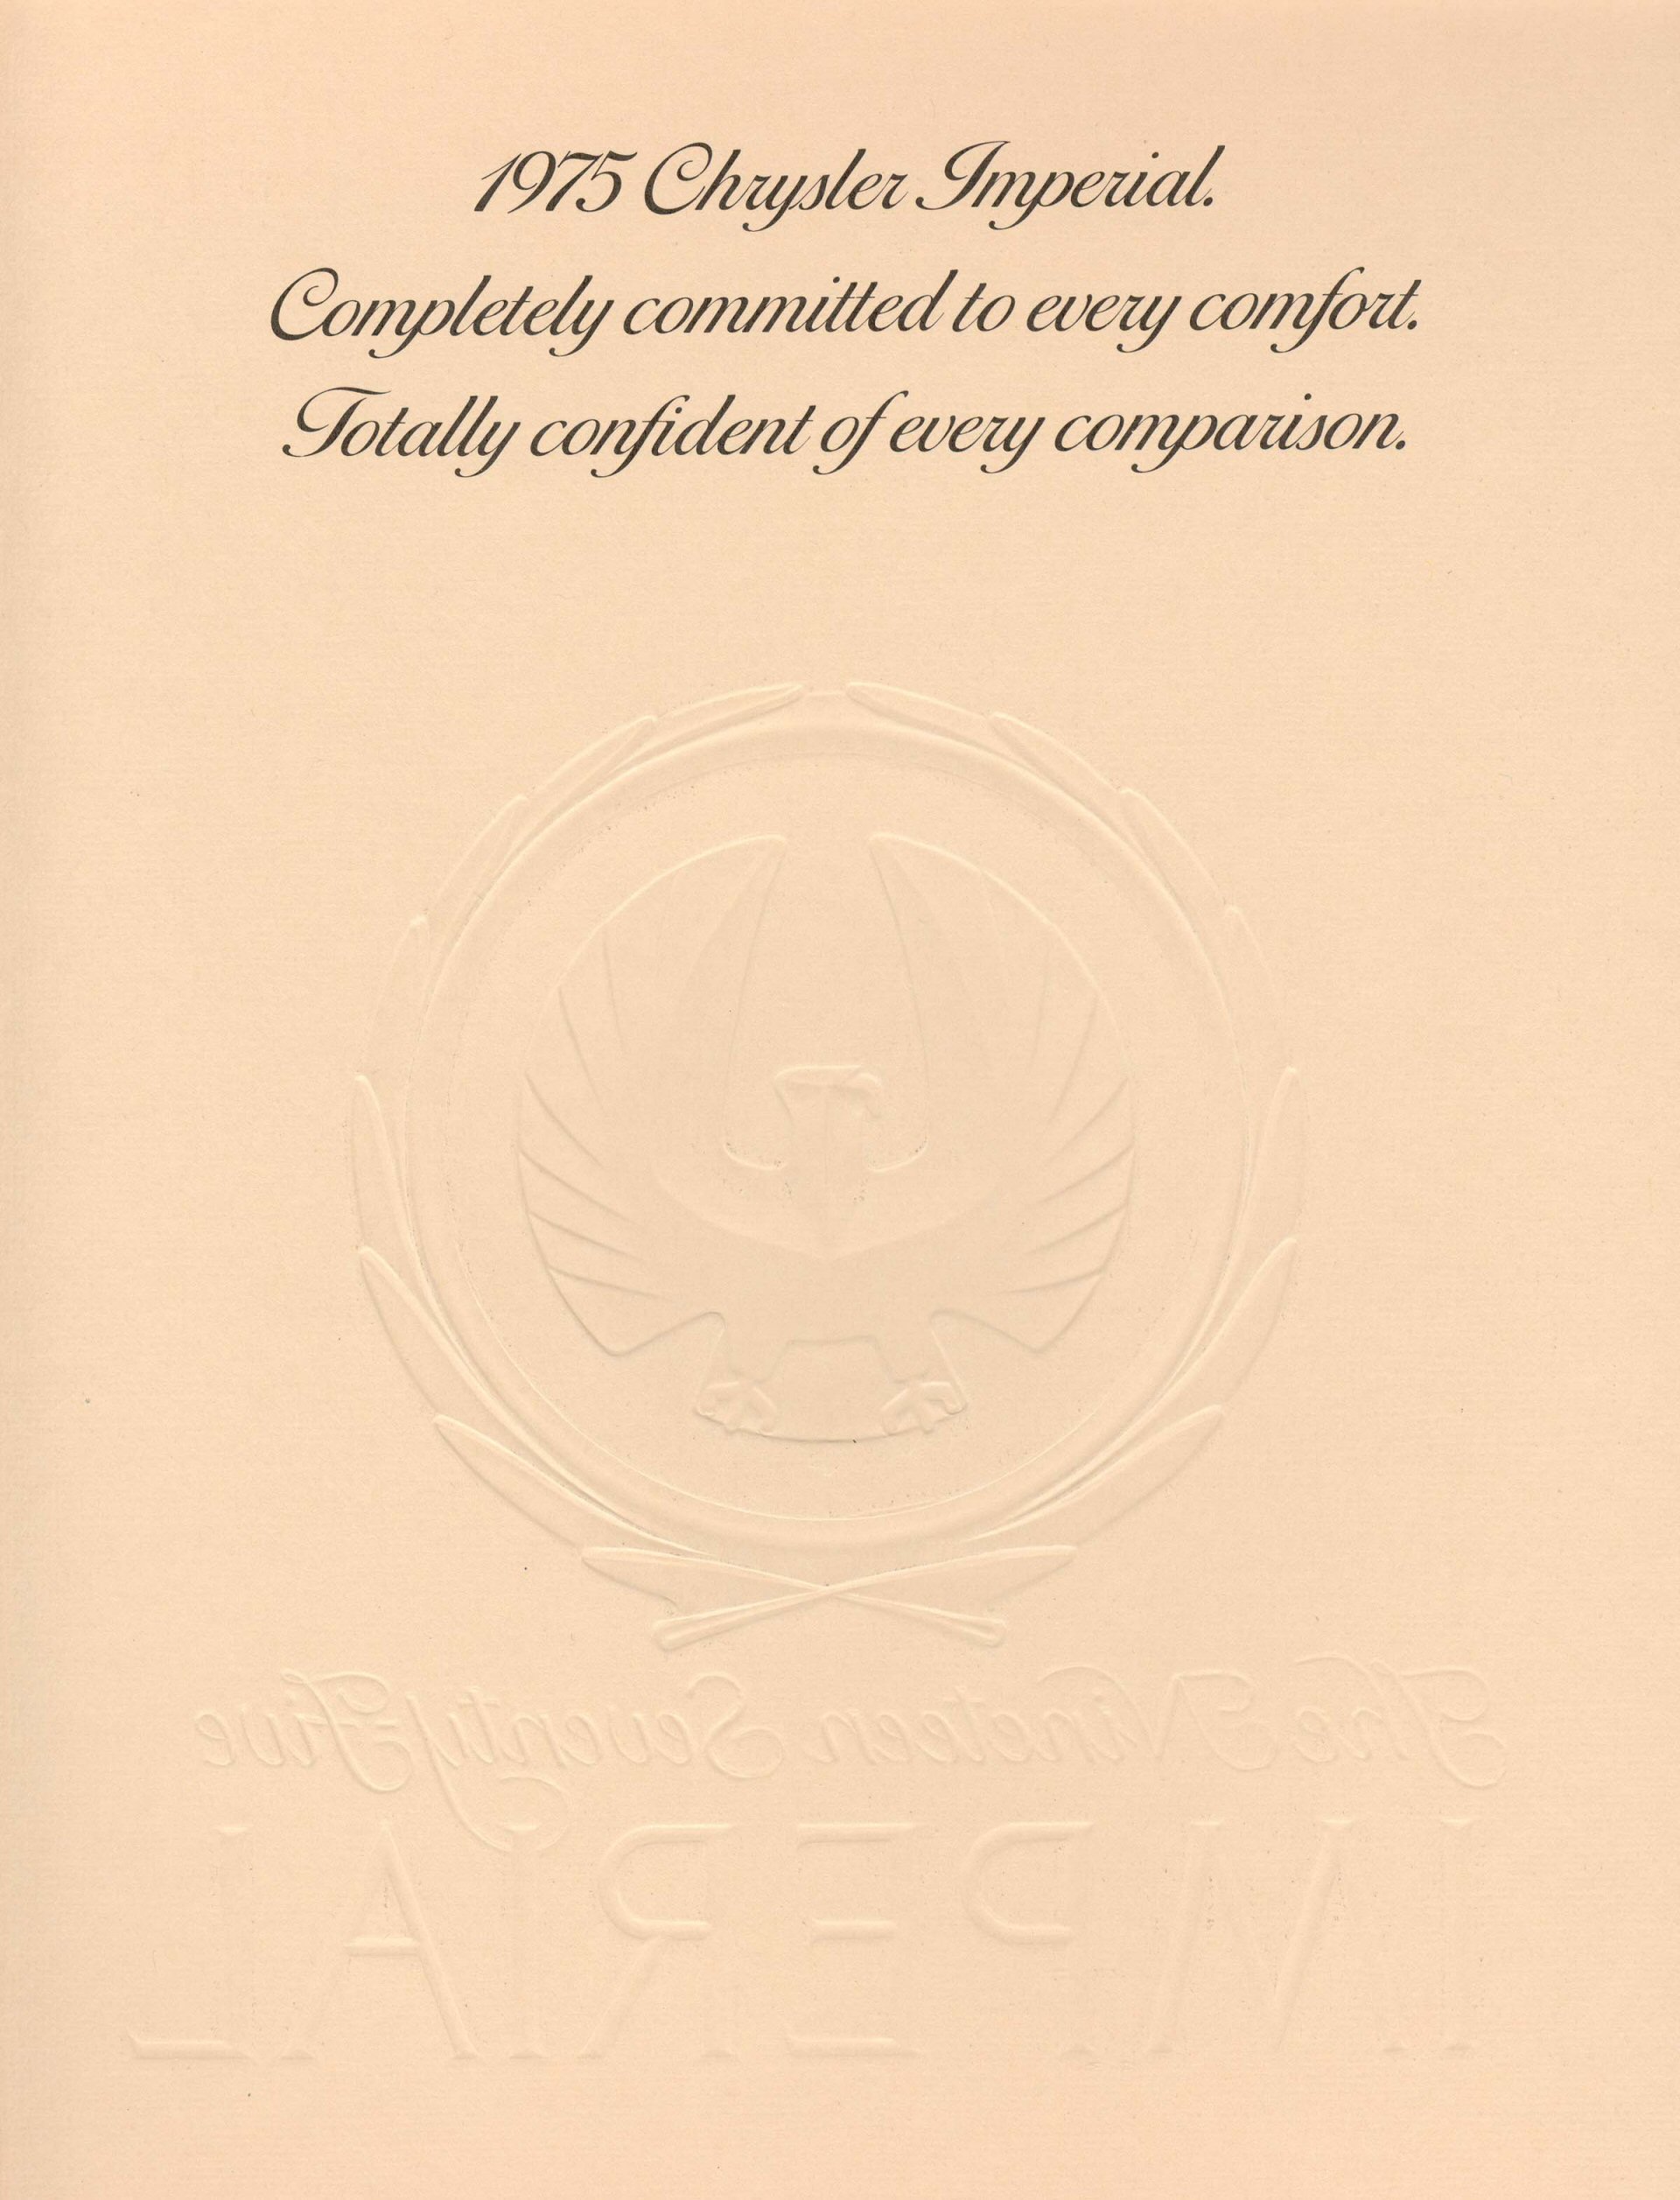 1975 Chrysler Imperial Brochure Page 5